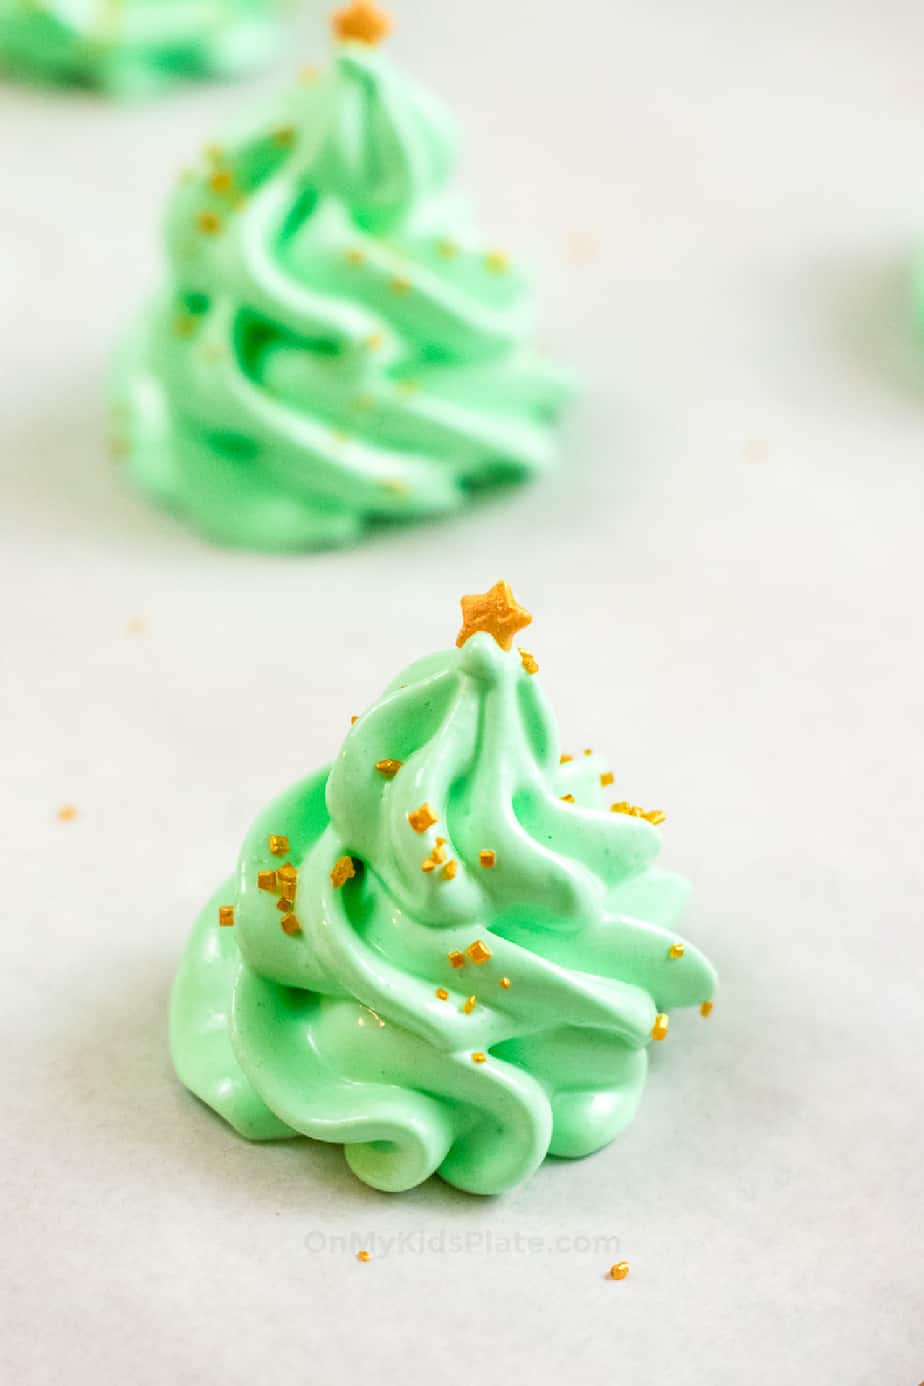 Close up side view of green meringue decorated like christmas trees with sprinkles and a star